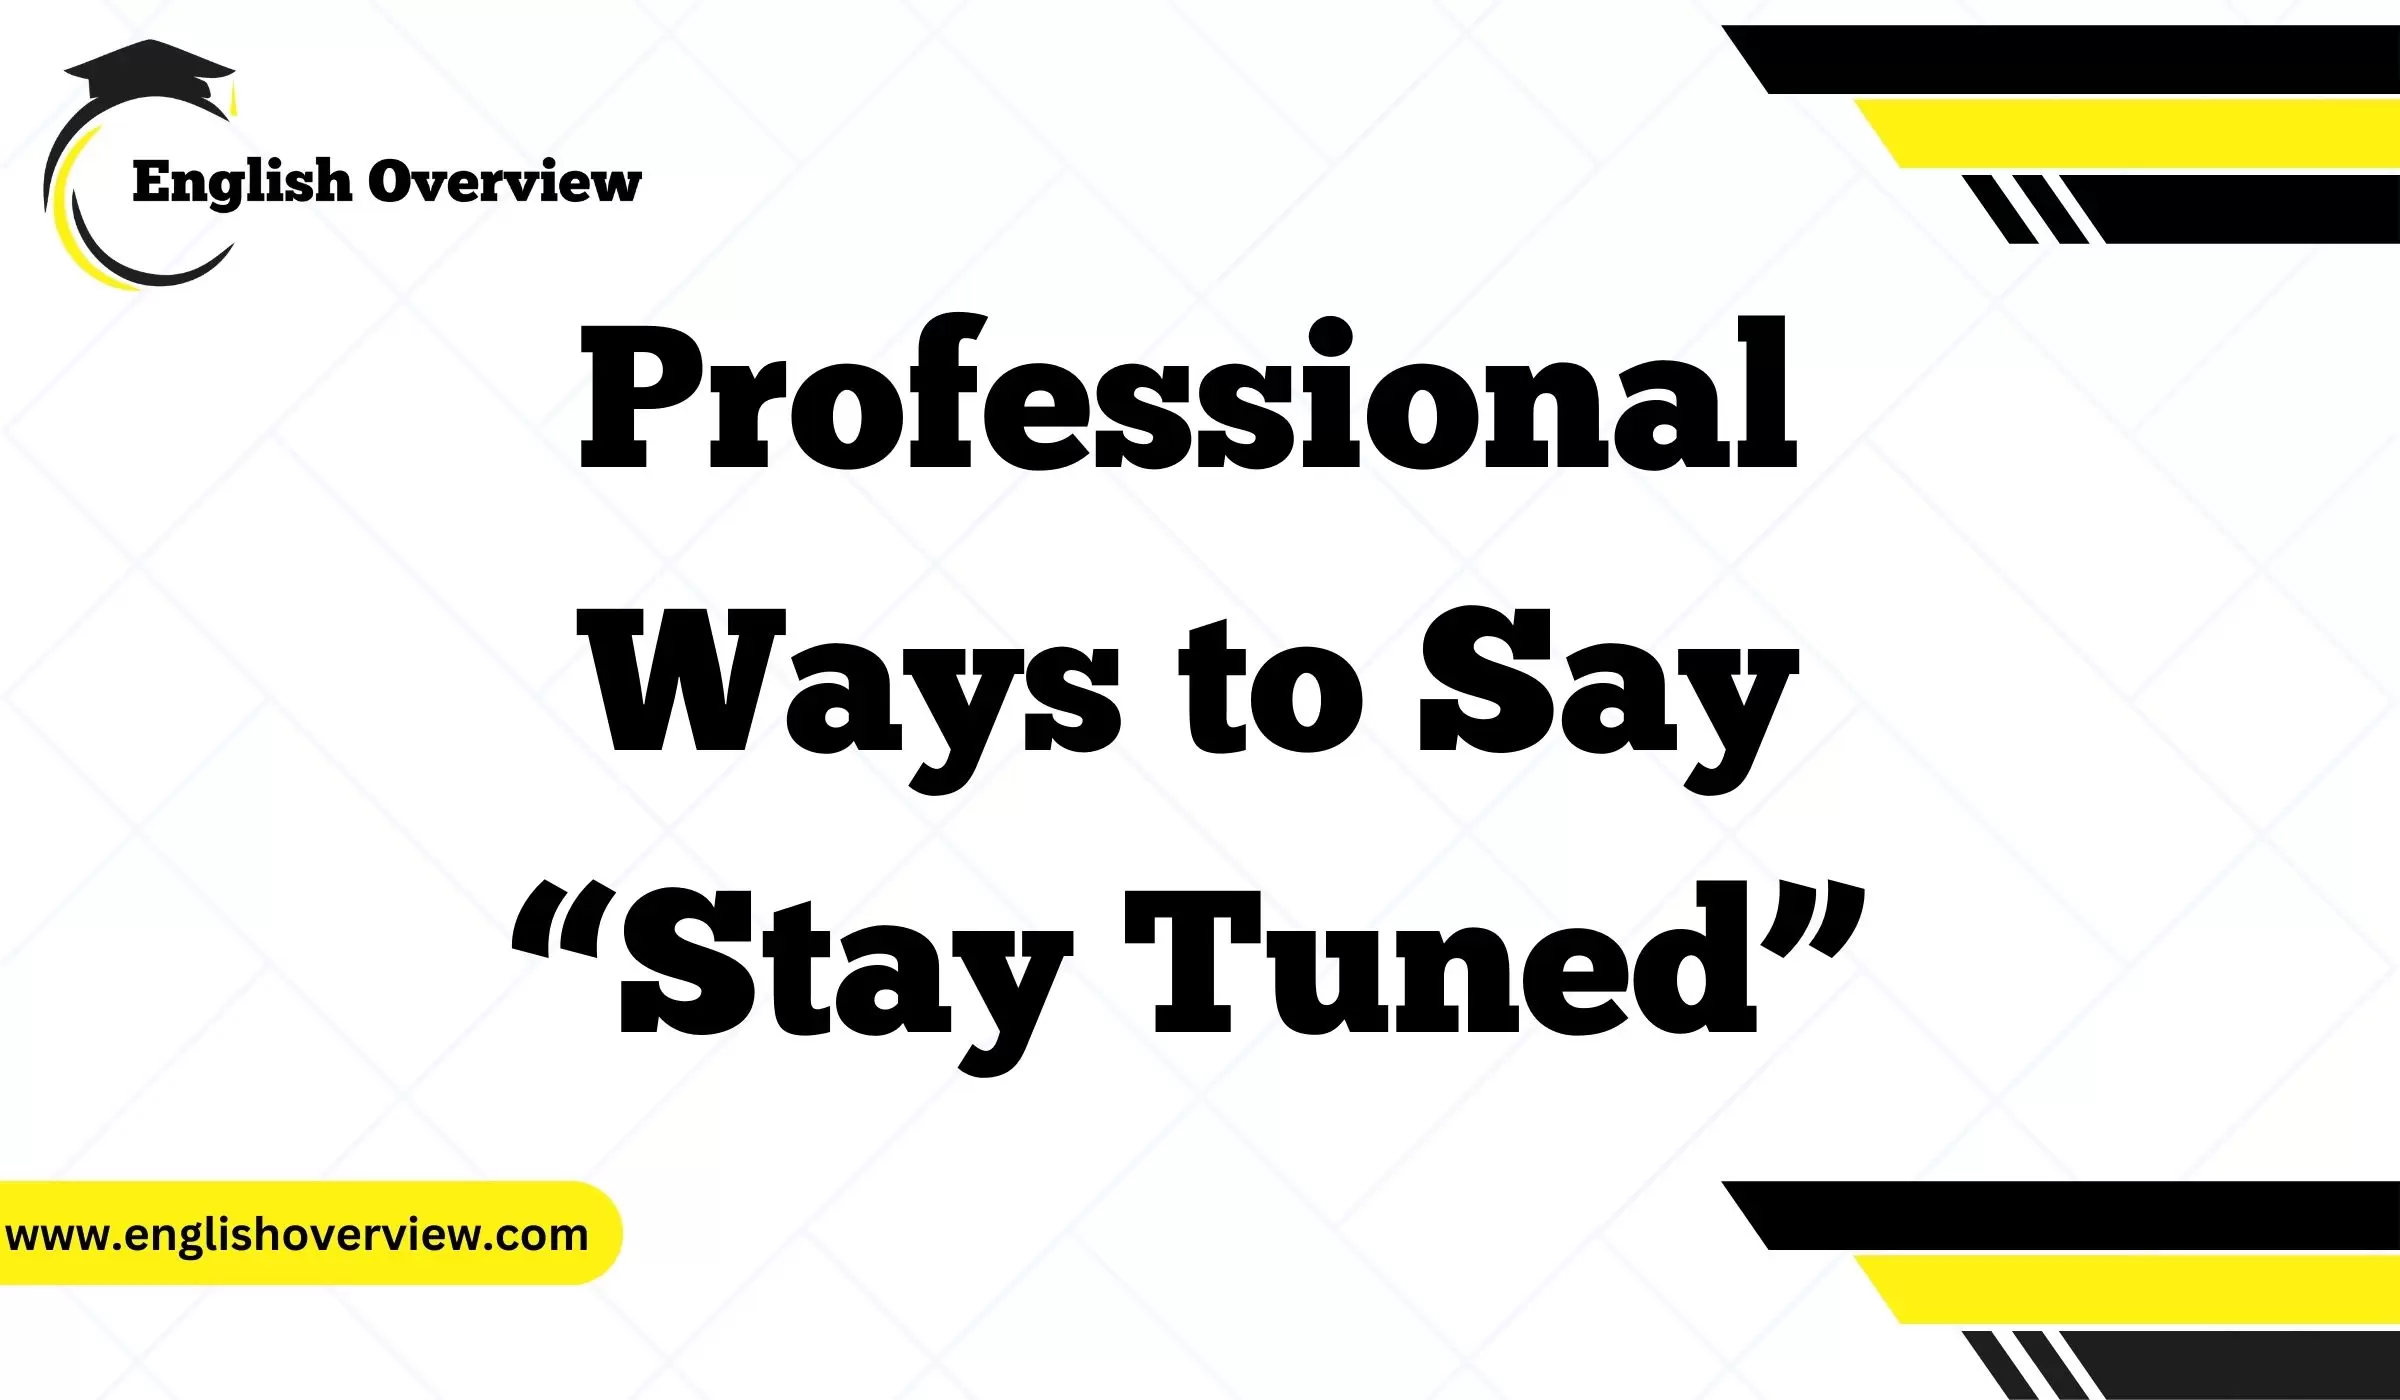 Professional Ways to Say “Stay Tuned”